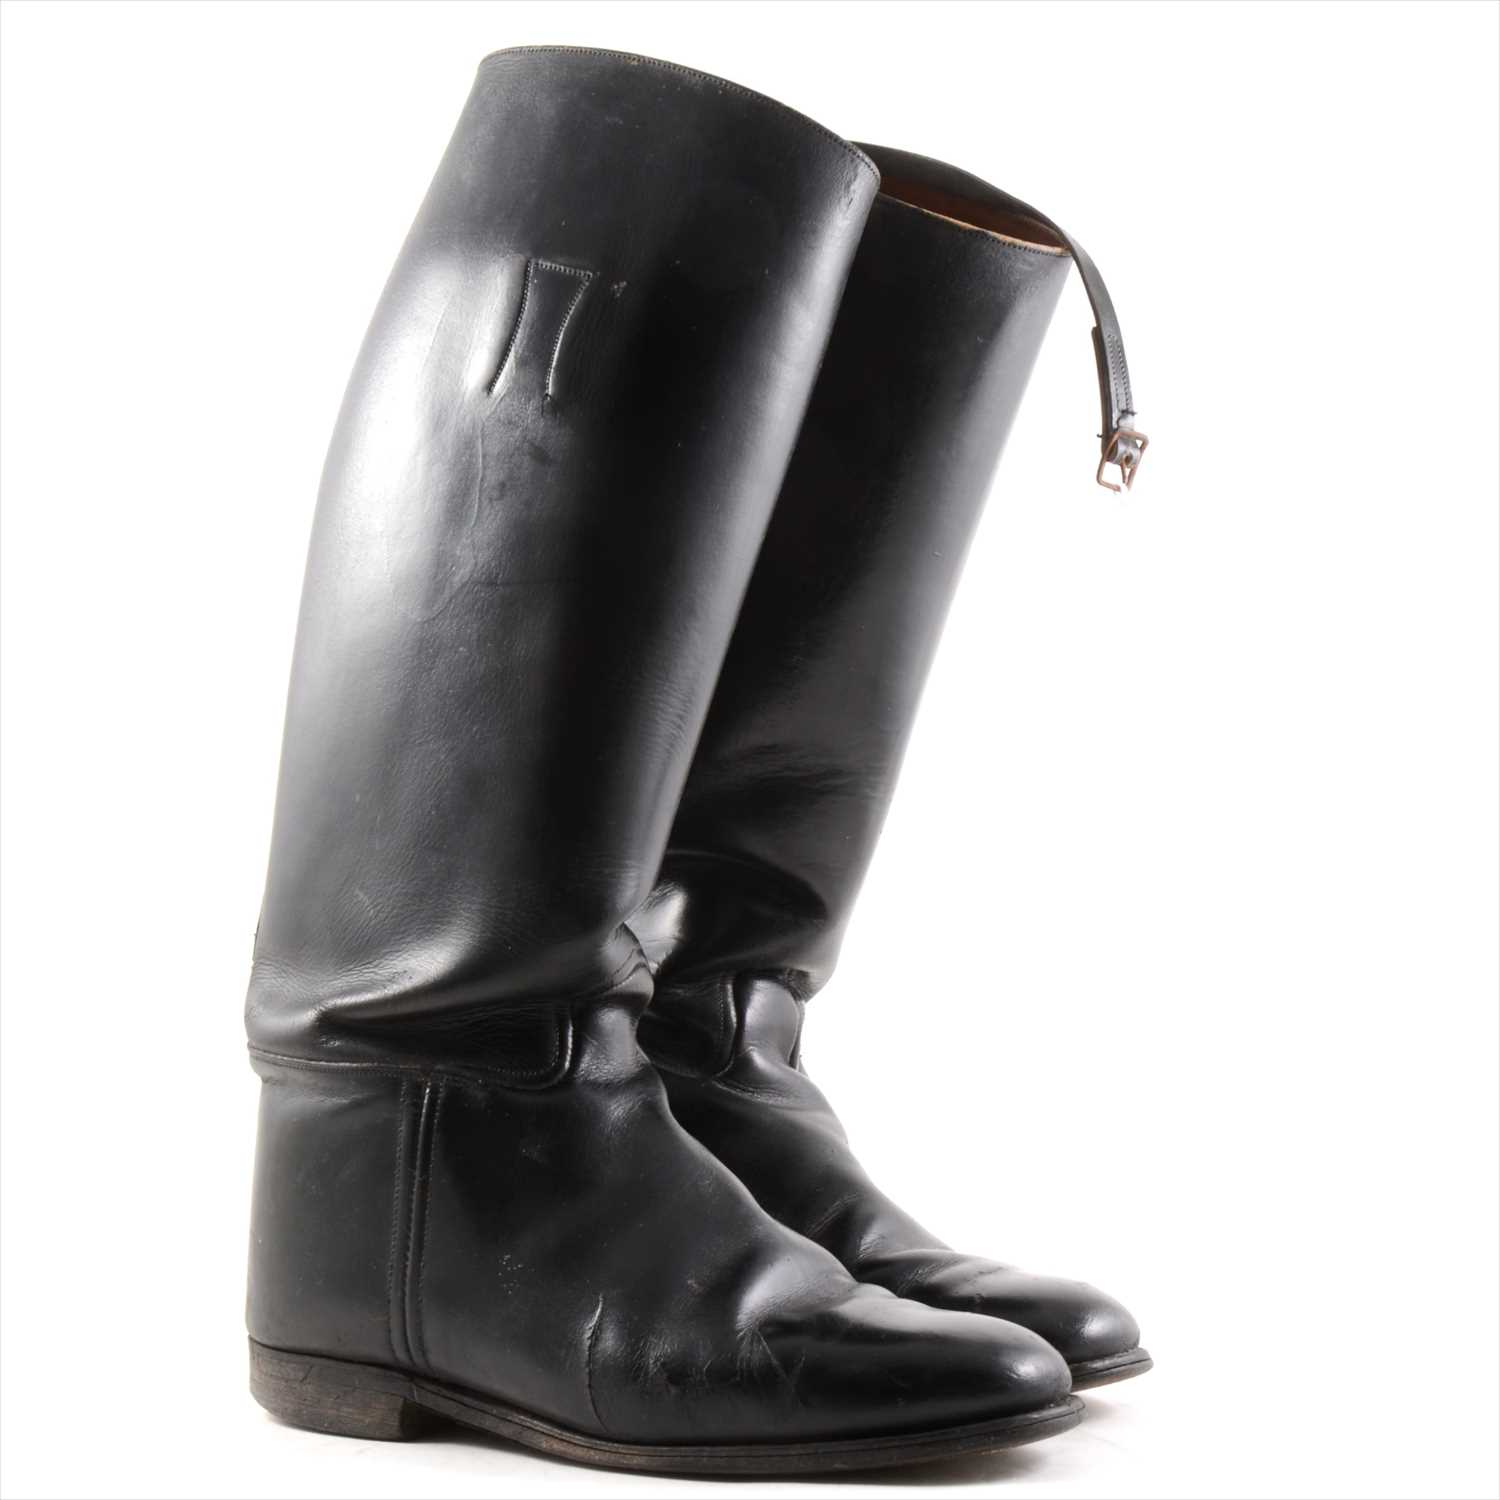 Lot 118 - A pair of lady's black leather riding boots, size 7.